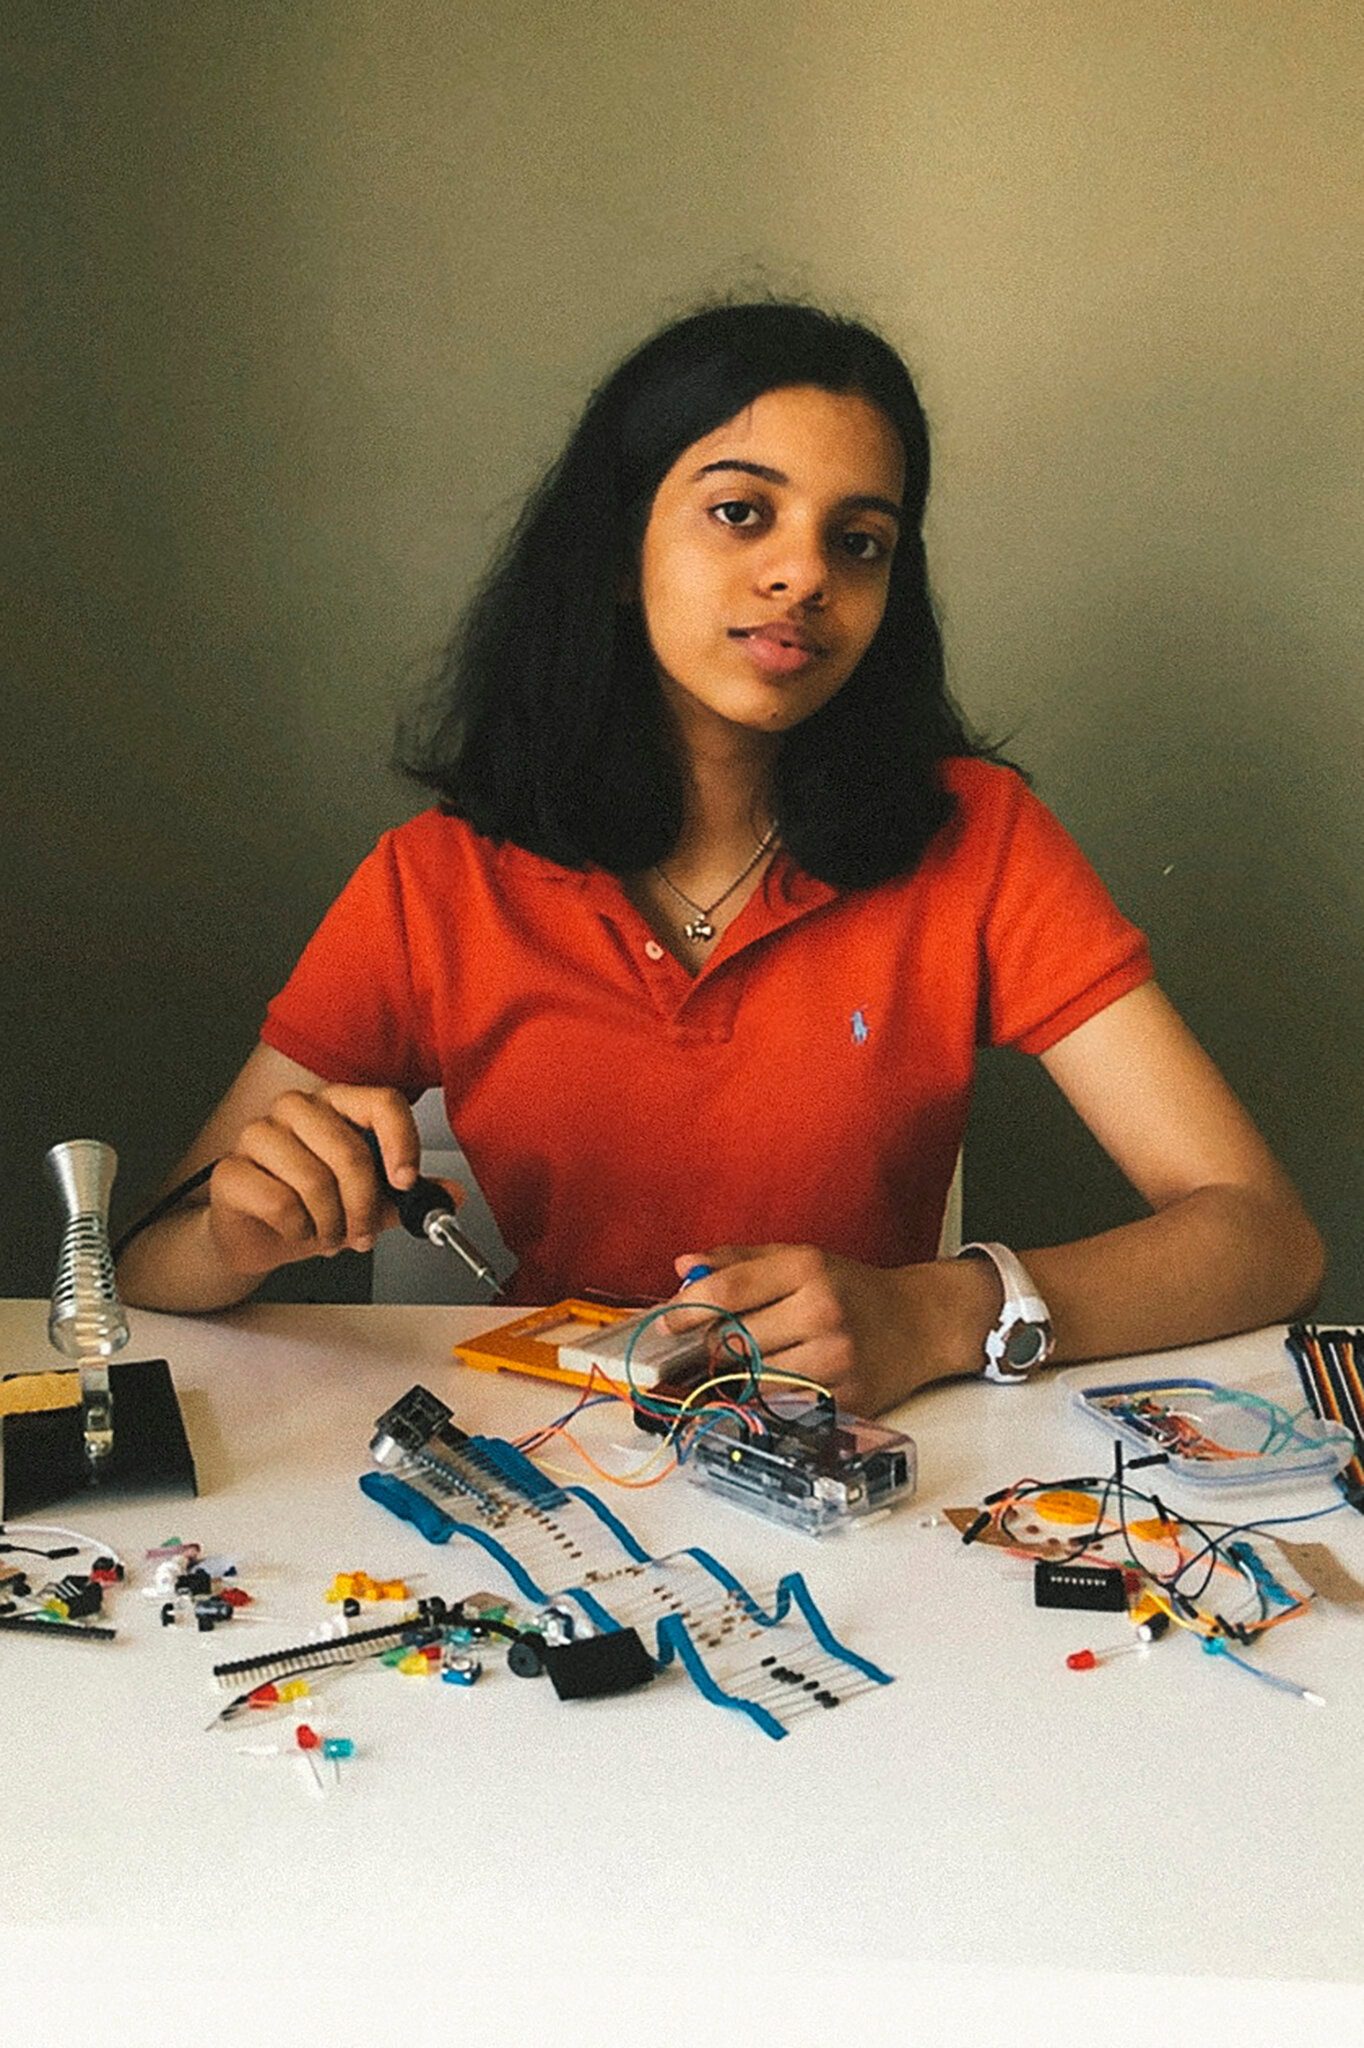 Meet Neha Shukla, the 16-year-old teen innovator, STEM whiz and recipient of the Diana Award in 2021 for her invention SixFeetApart.